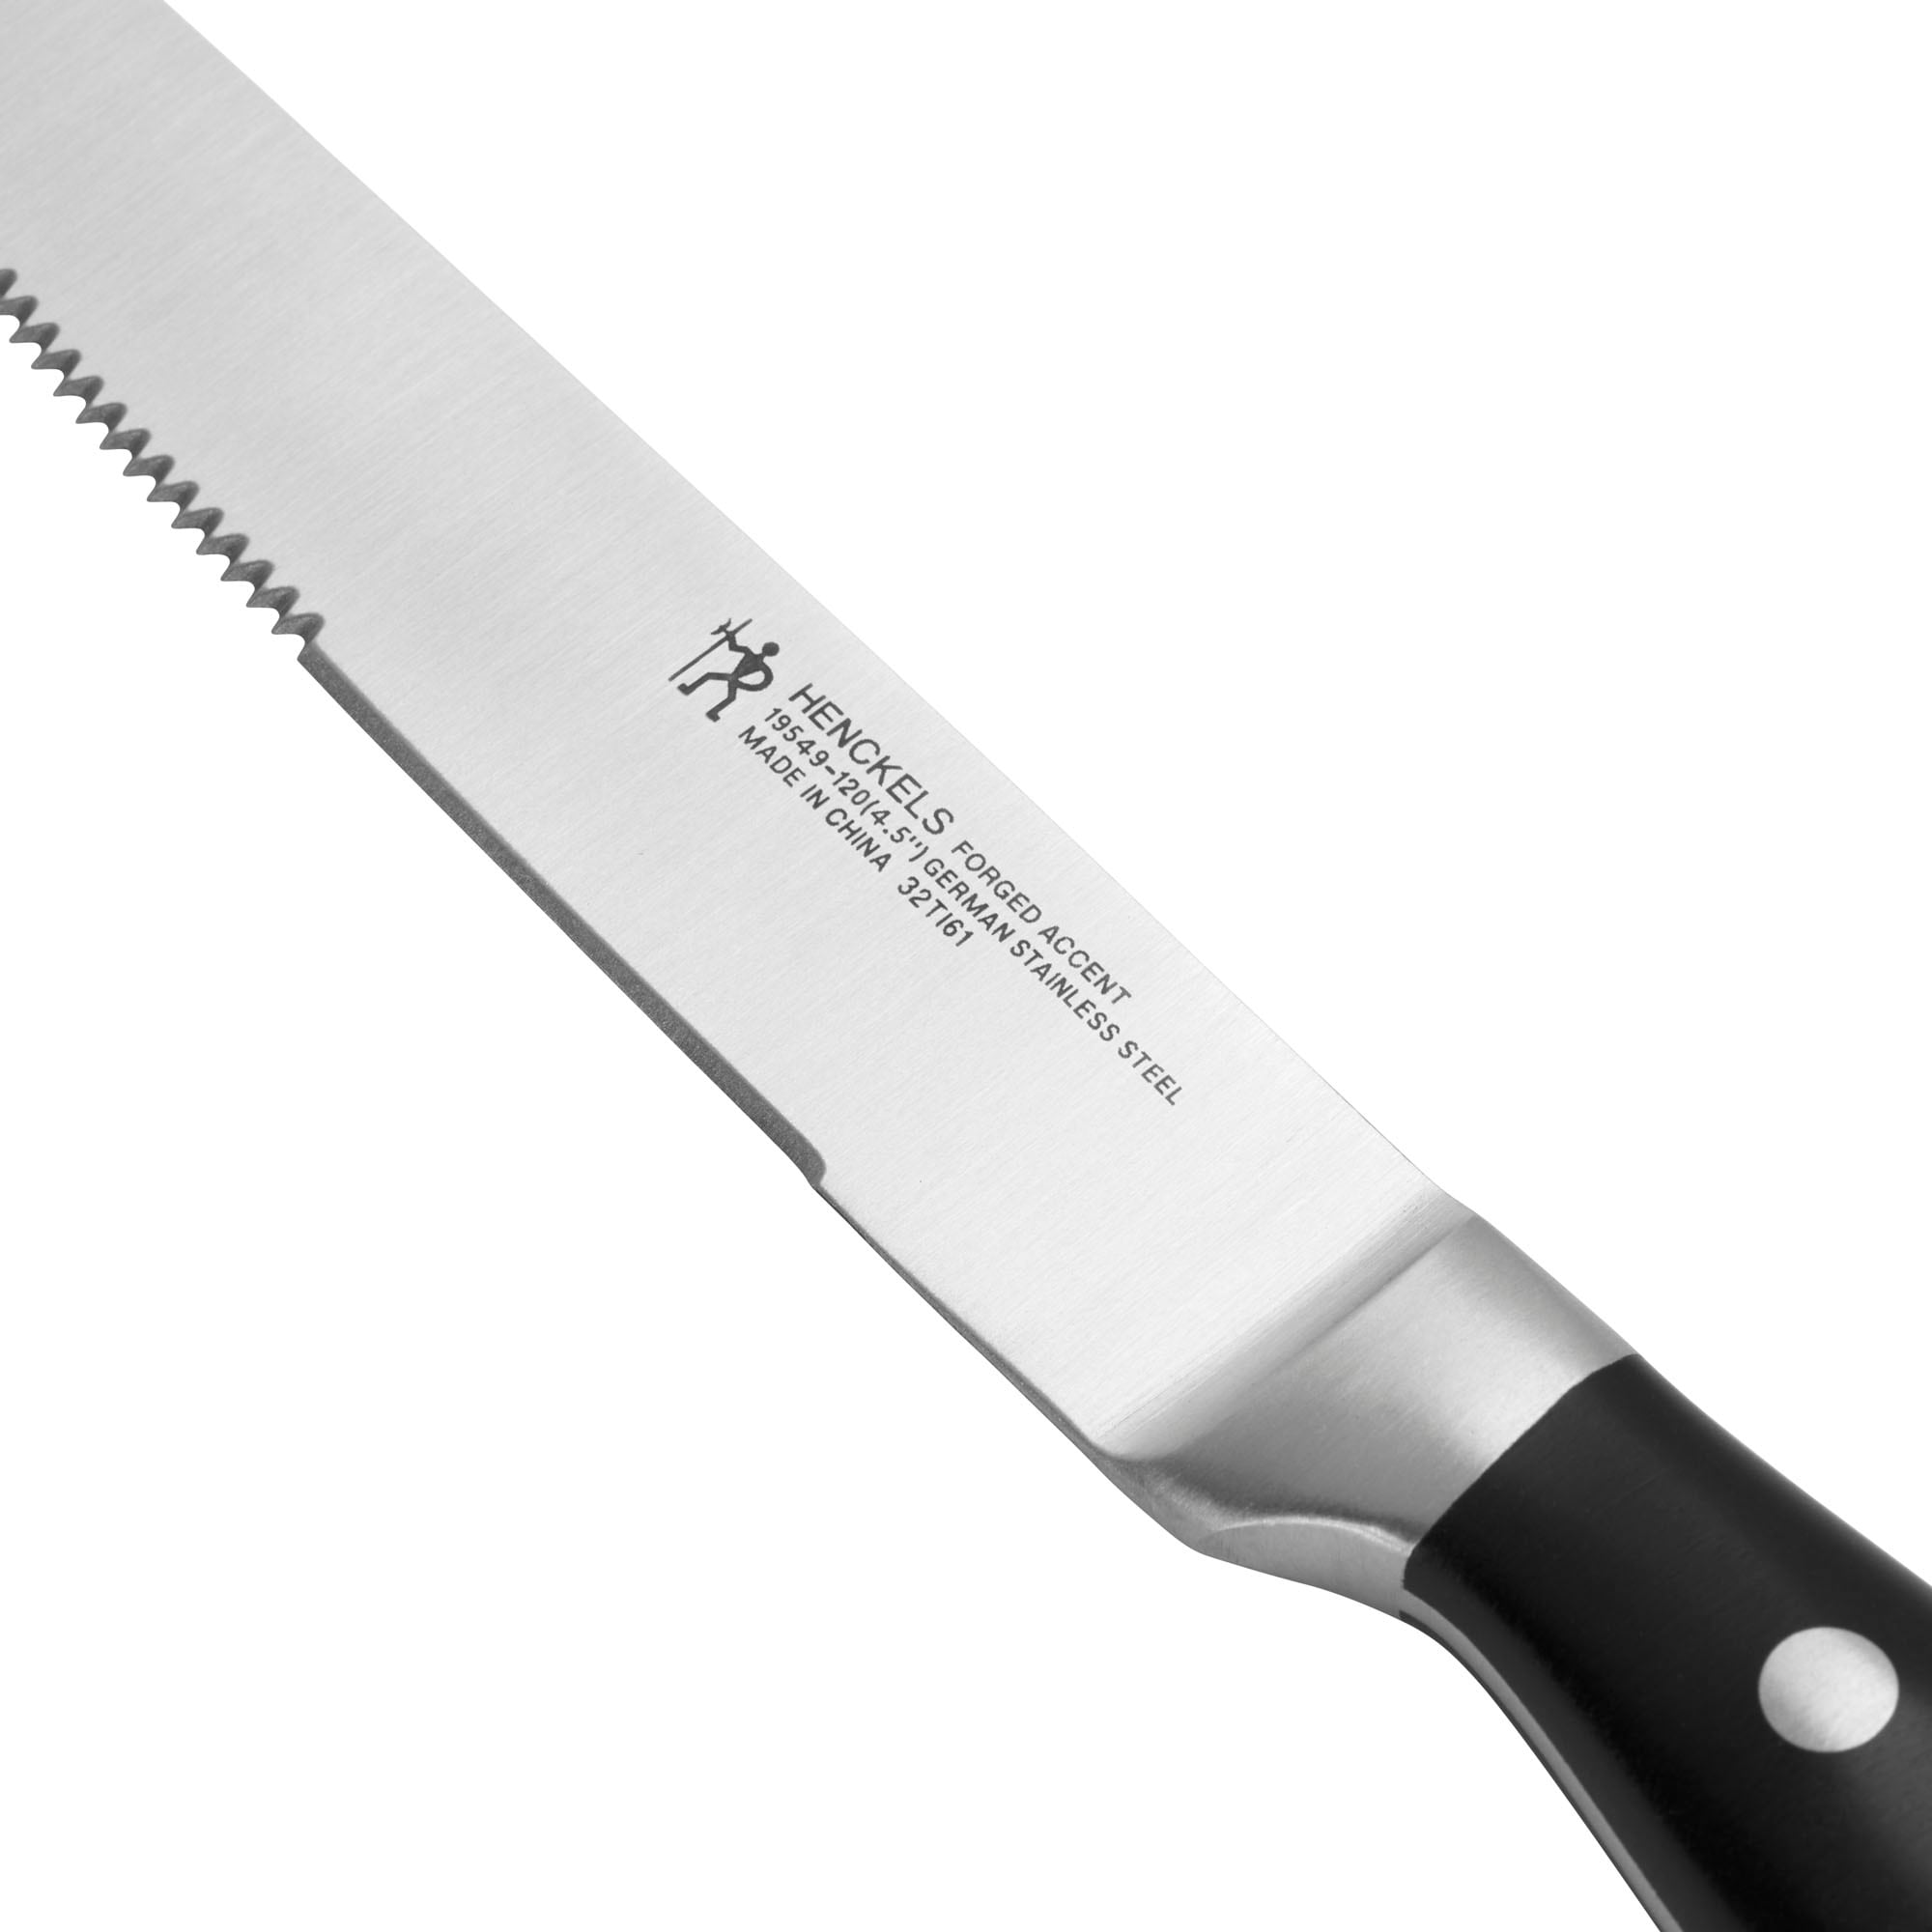 https://ak1.ostkcdn.com/images/products/is/images/direct/8a35b060a9291384dd2dc20253b81f7c49659409/HENCKELS-Forged-Accent-4-pc-Steak-Knife-Set.jpg